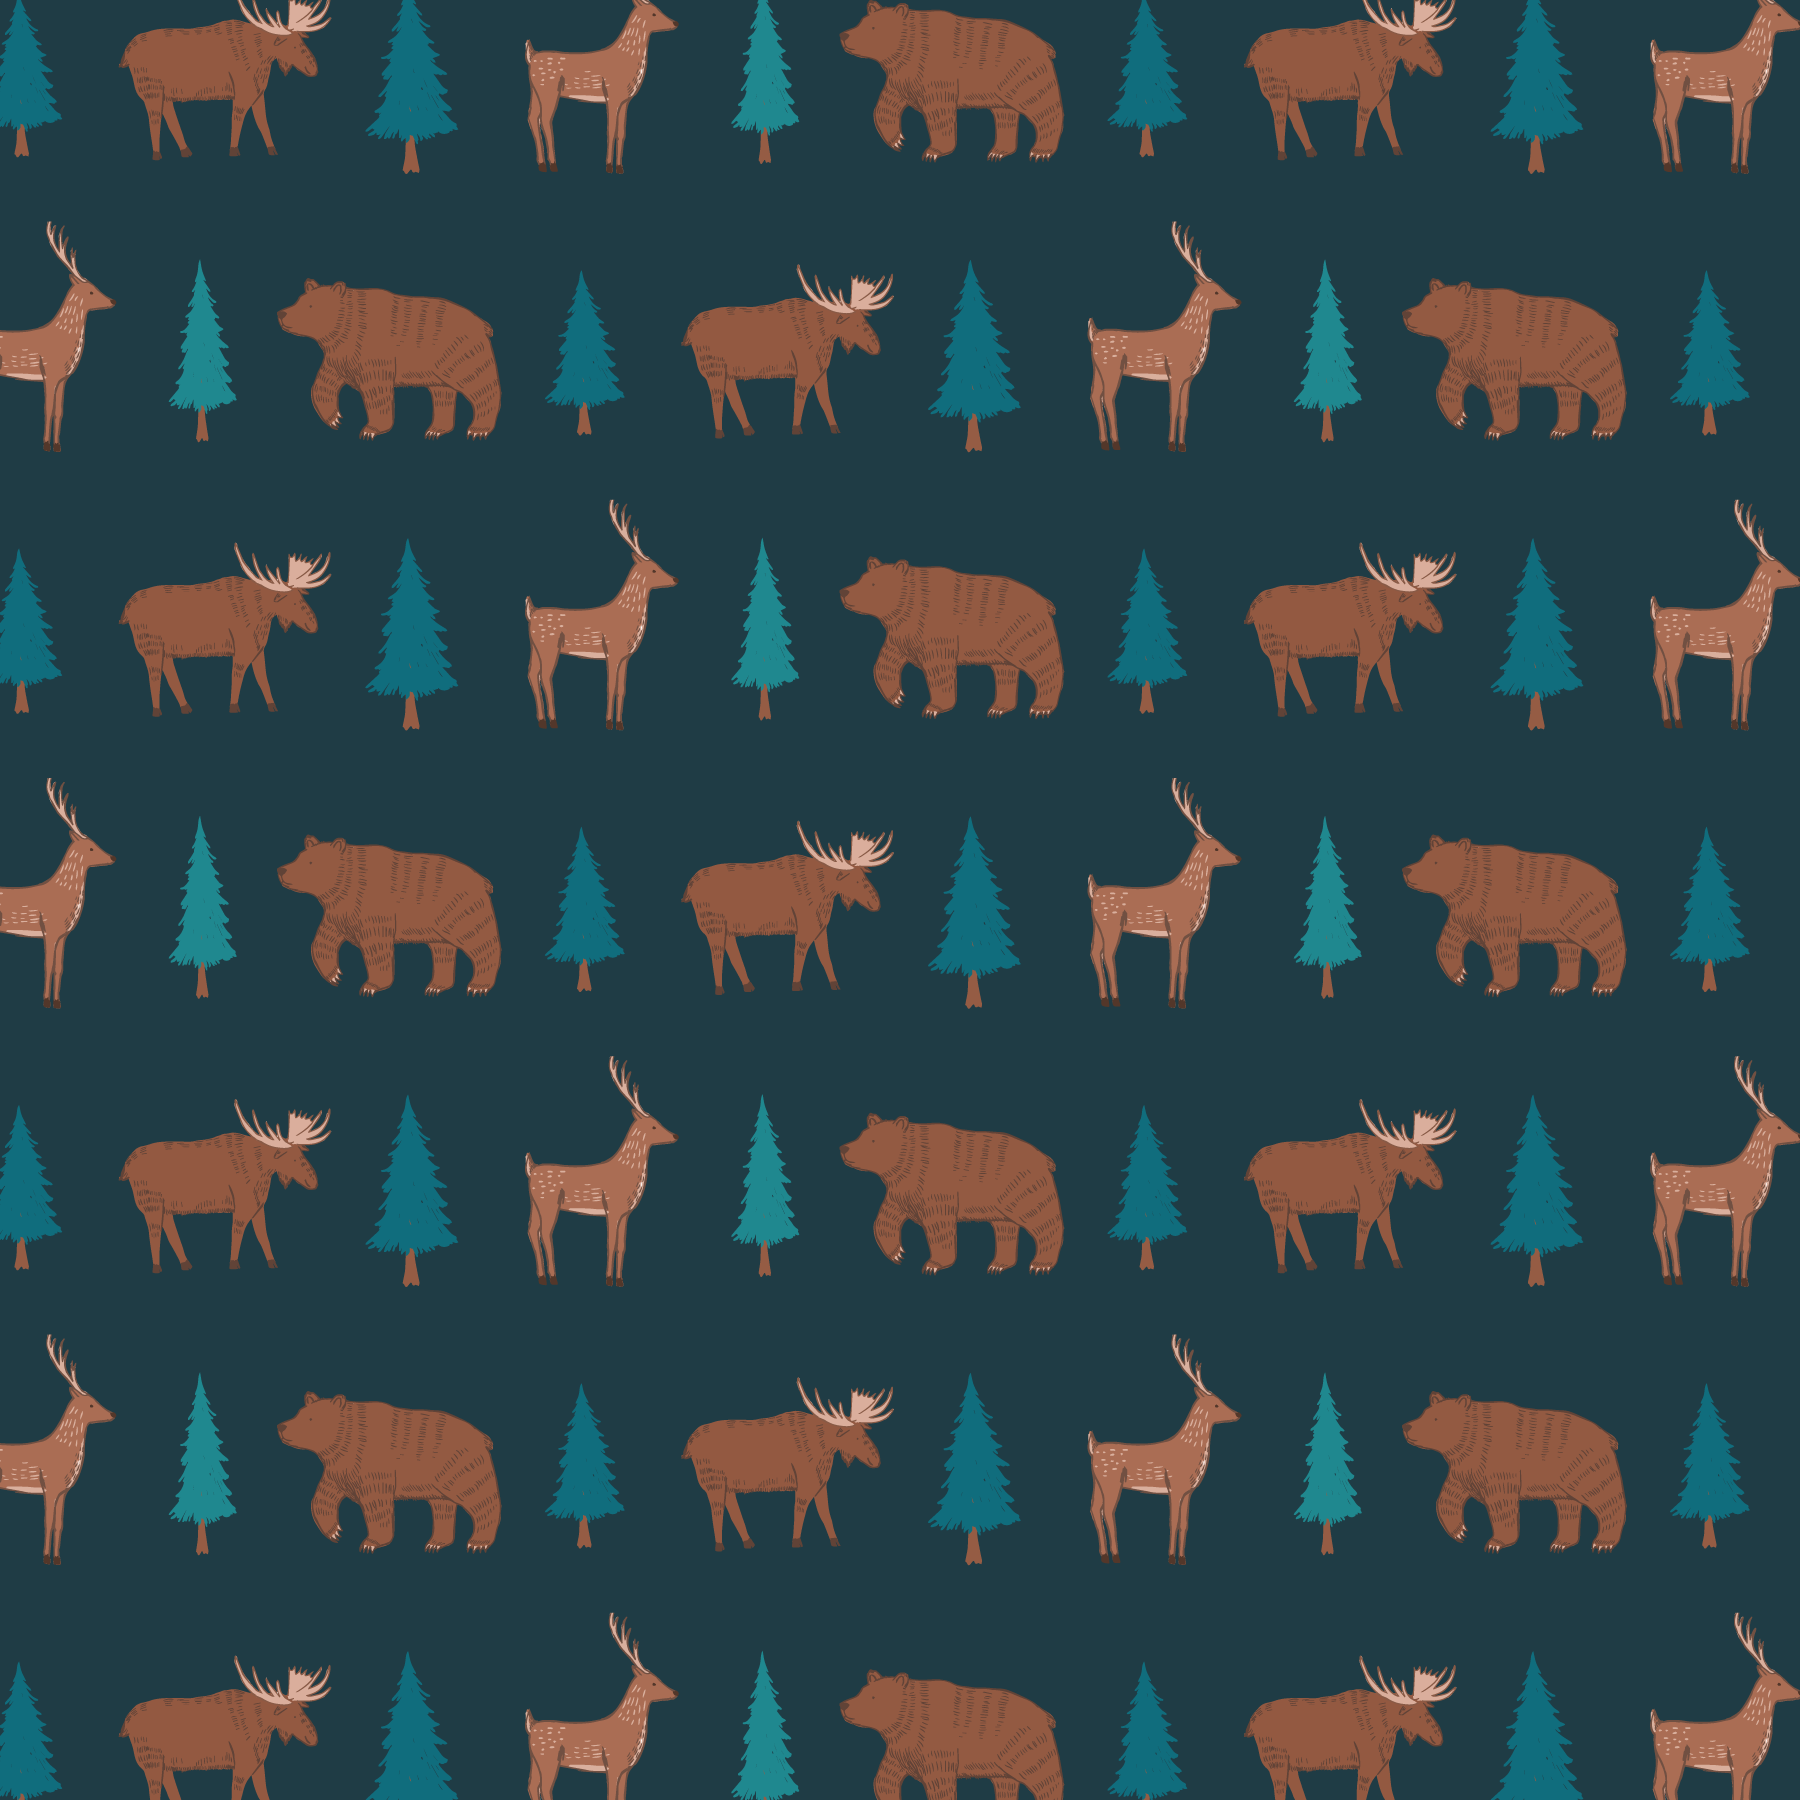 mountain-pattern-swatch-2.png